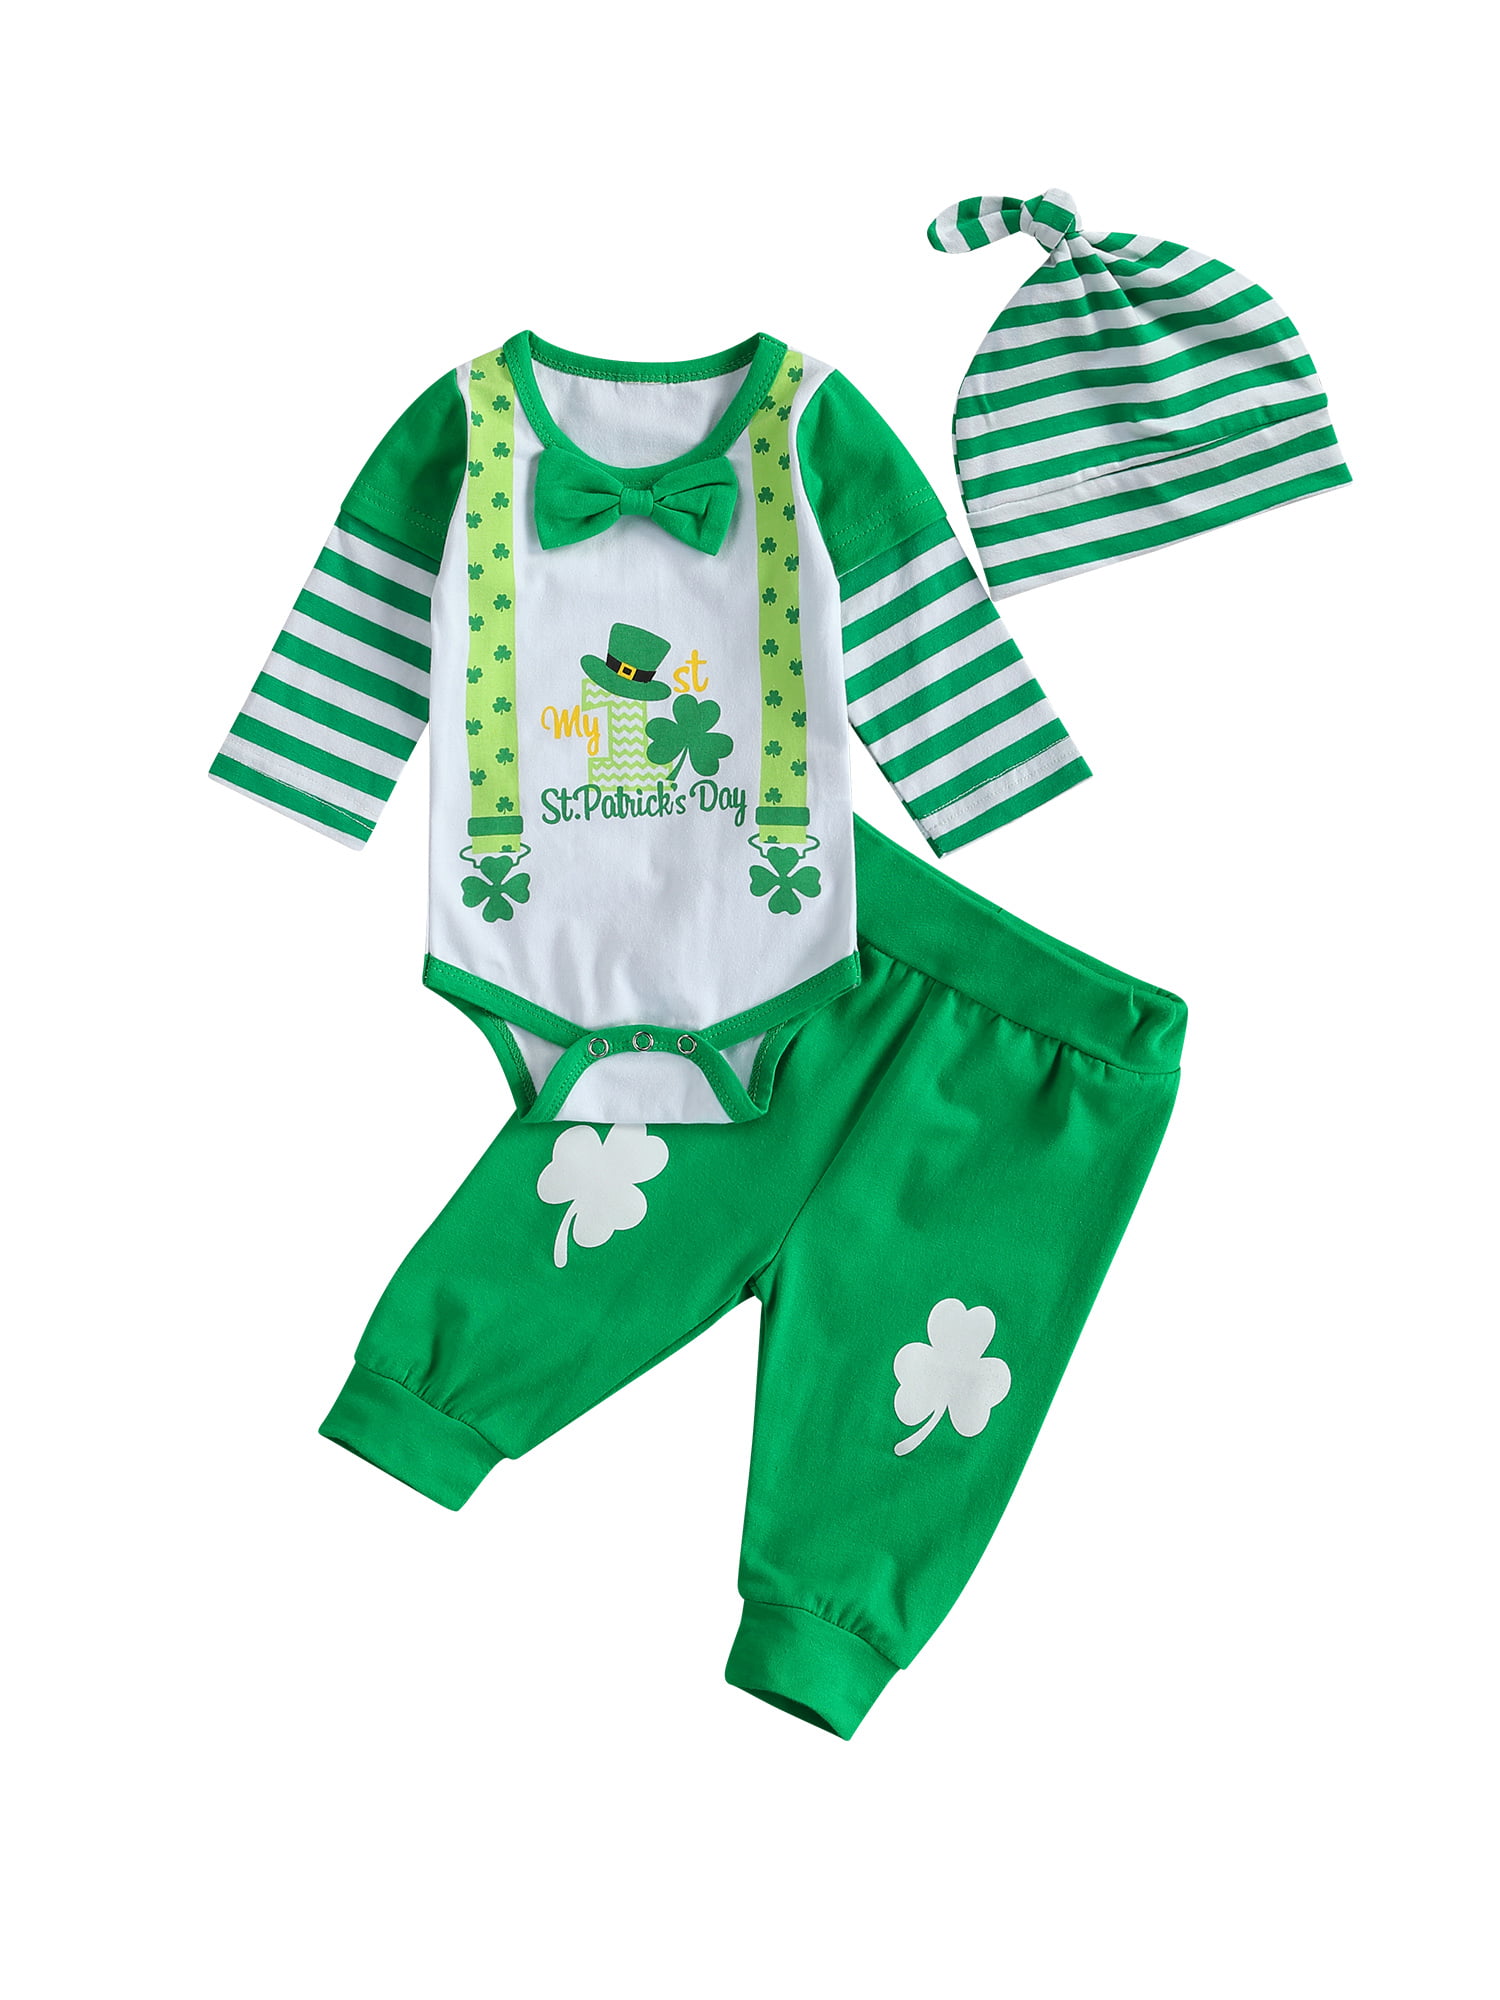 Patricks Day Baby Boy Girl Clover Clothes Set Bodysuit Pants Hat Newborn Gentleman Outfits 3PC My First St